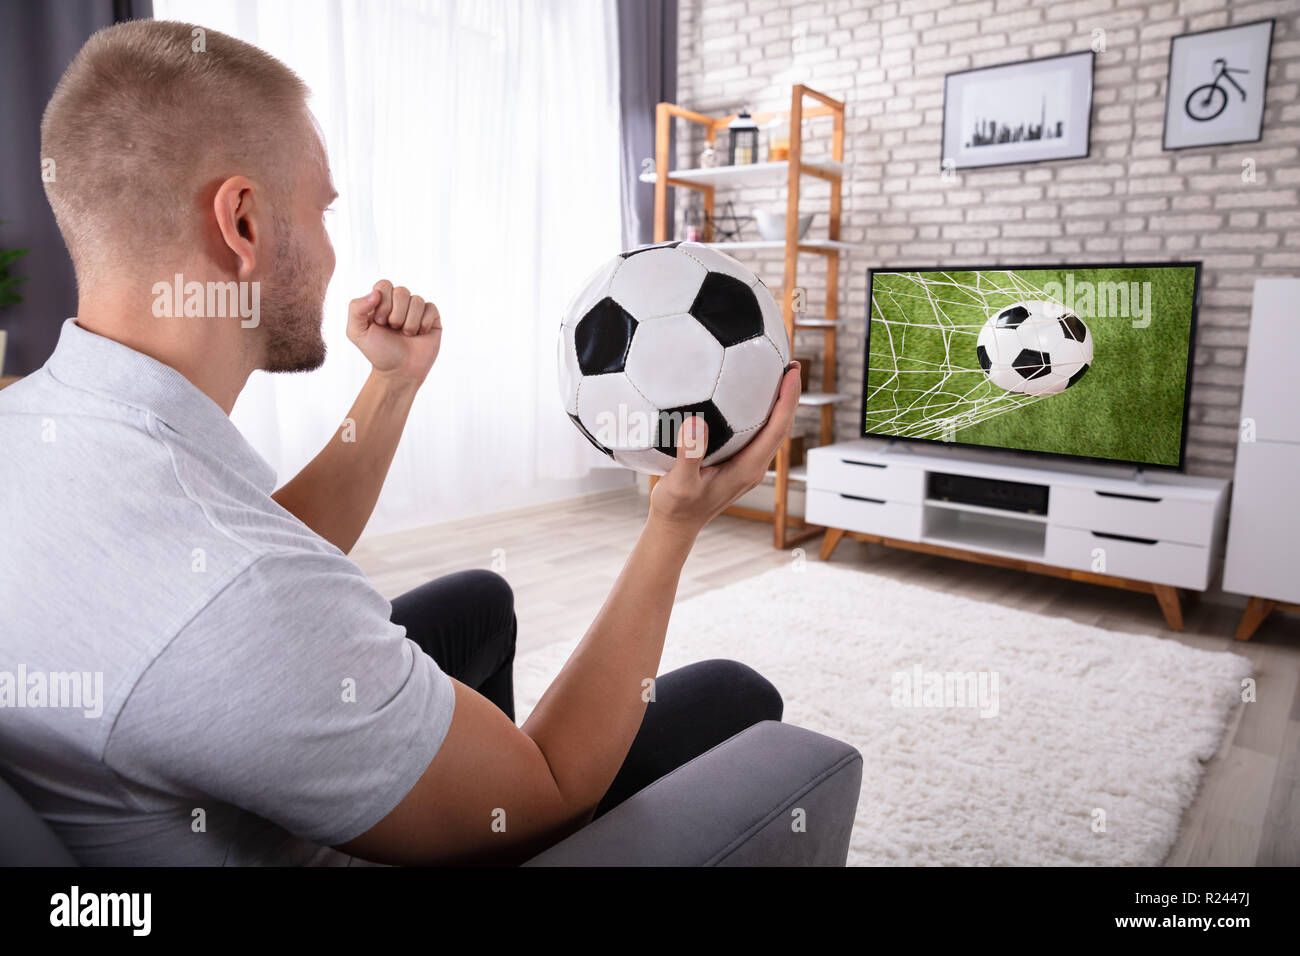 Excited Man Enjoying Football Match On Television At Home Stock Photo